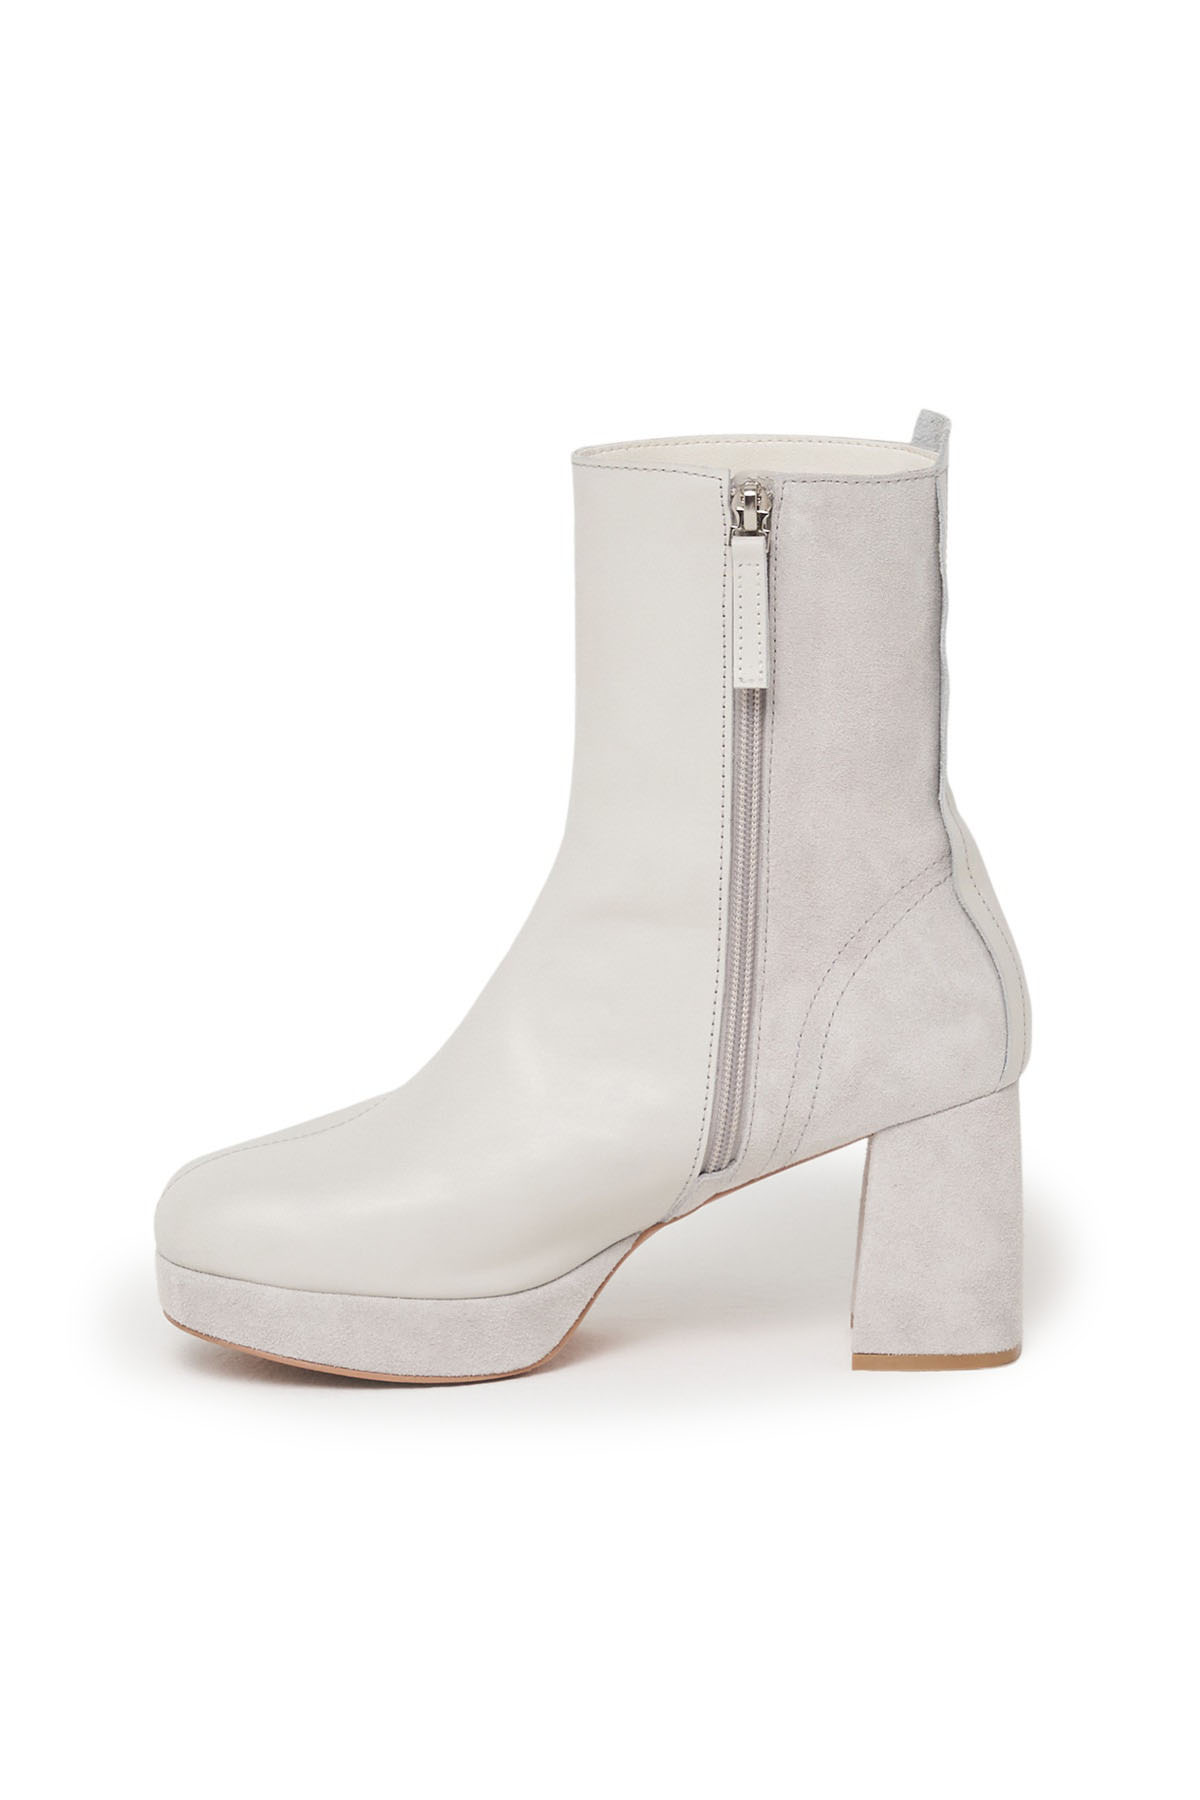 ROUND ANKLE BOOTS IN LIGHTGREY